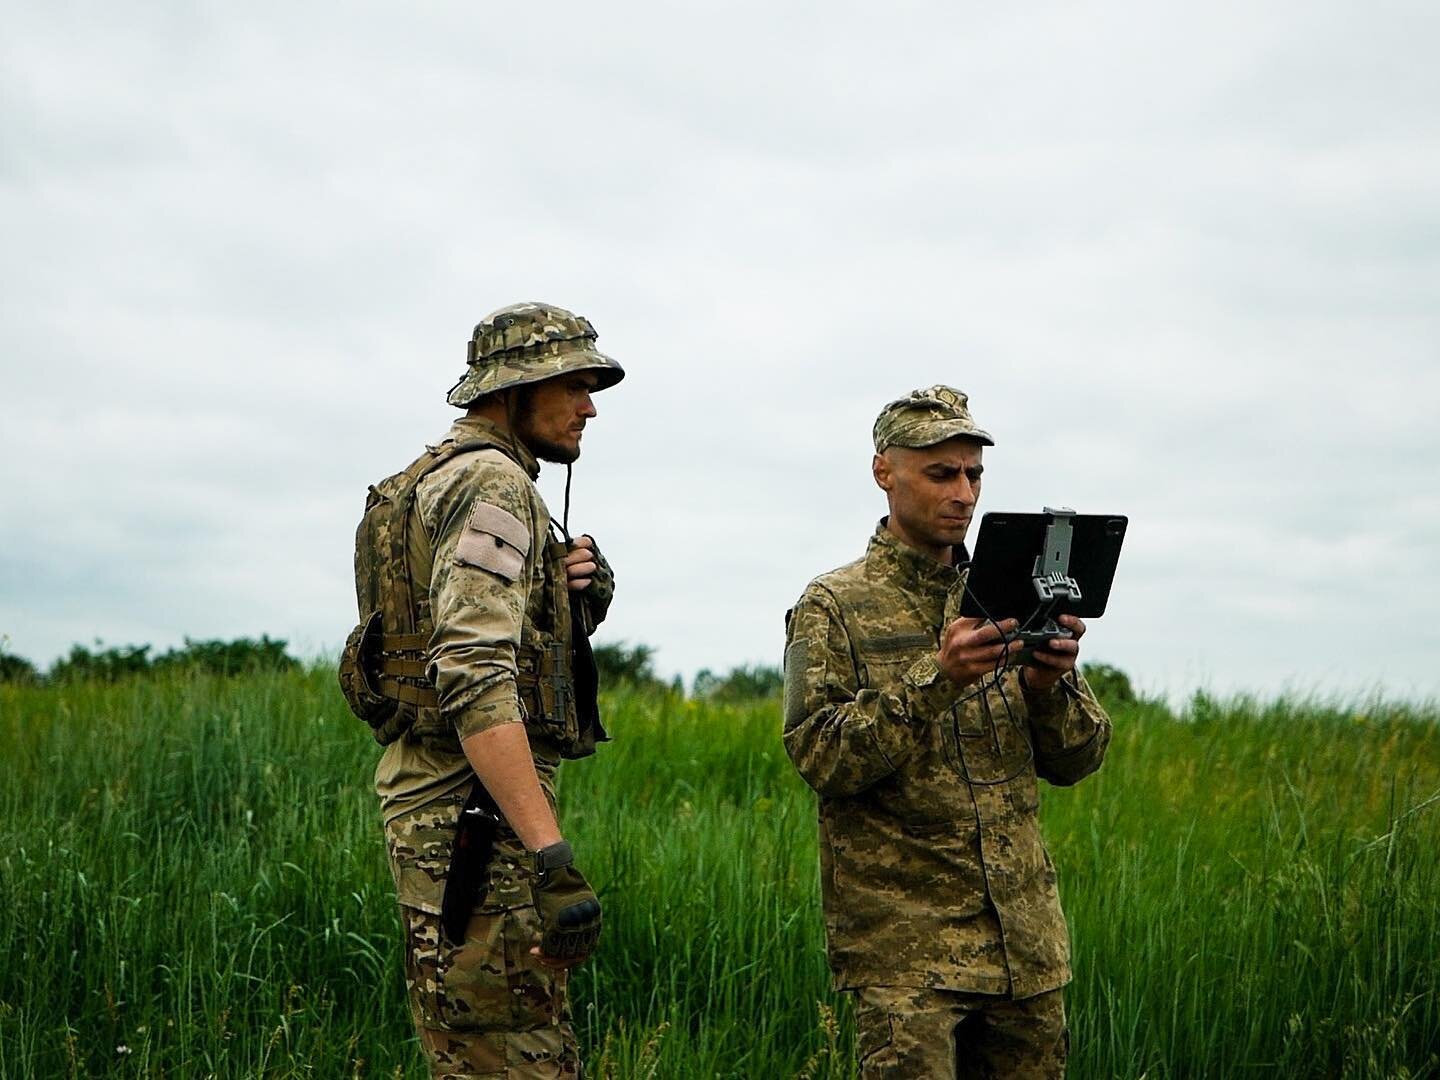 Drone boys and their toys 

Two army units from the 53rd Brigade, one an anti-drone team and the other Kamikaze pilots, train together in the Donbas. The units are now collaborating to see how they can help Ukraine gain an advantage in the sky. 

And